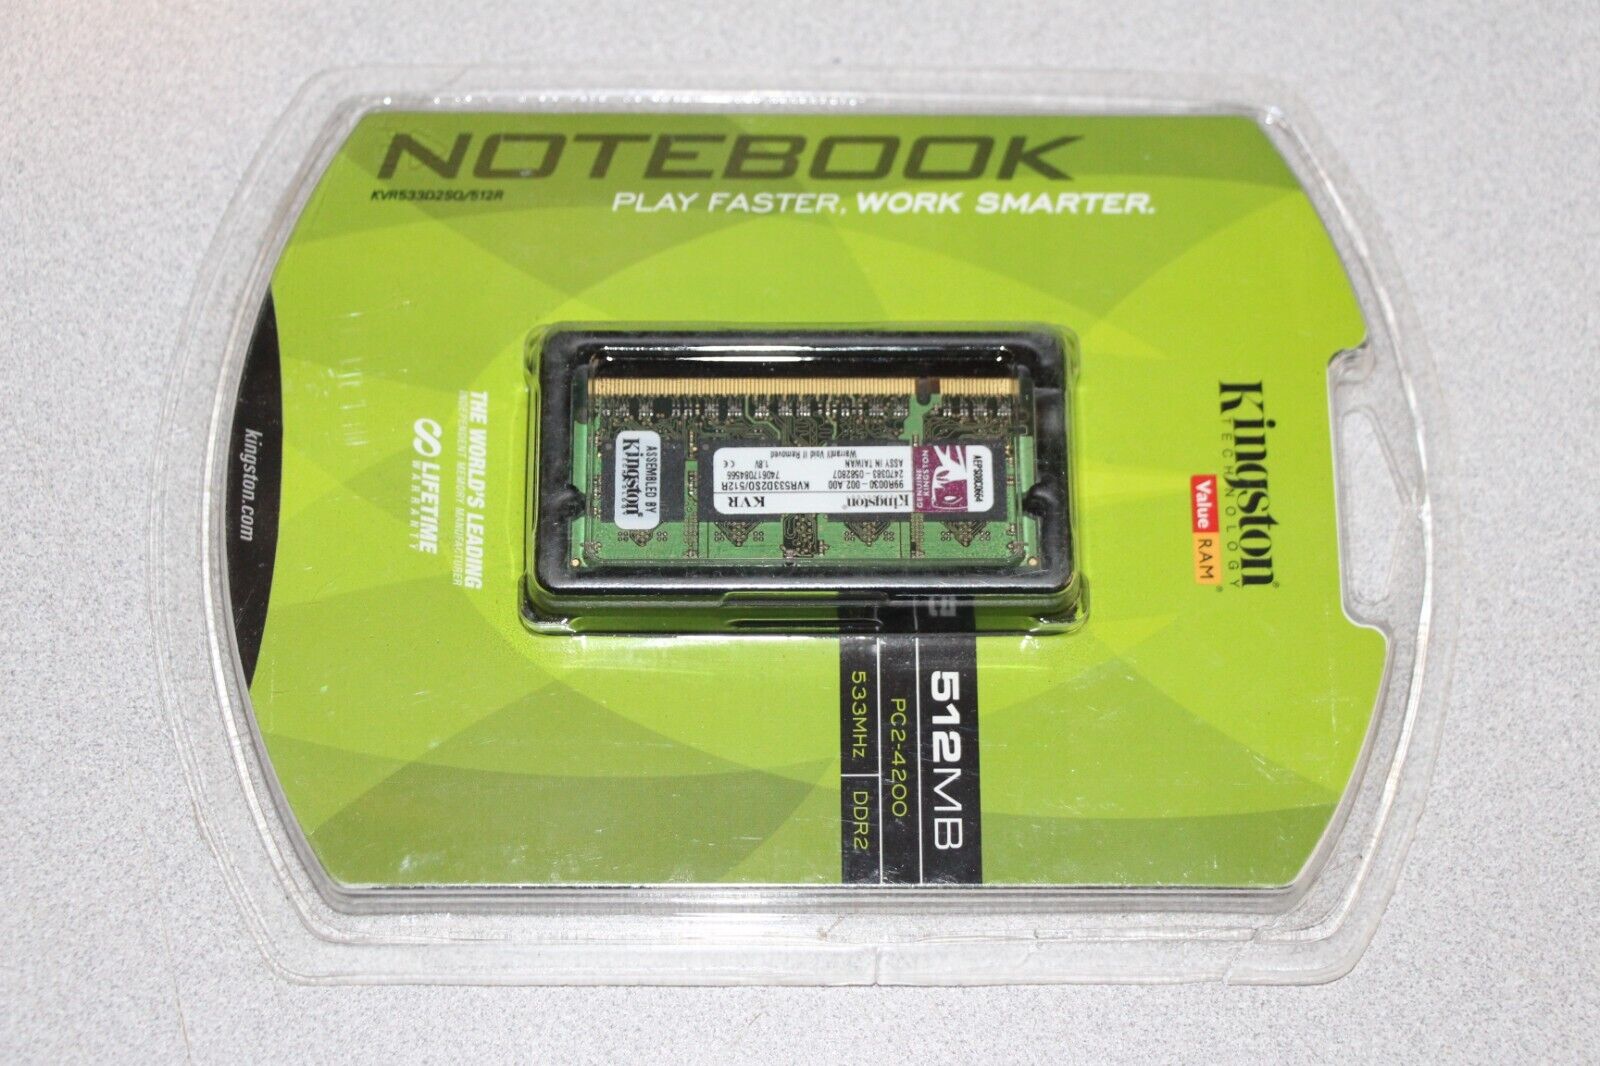 Kingston Notebook 512MB PC2-4200 533MHz DDR2 KVR533D2SO/512R NEW